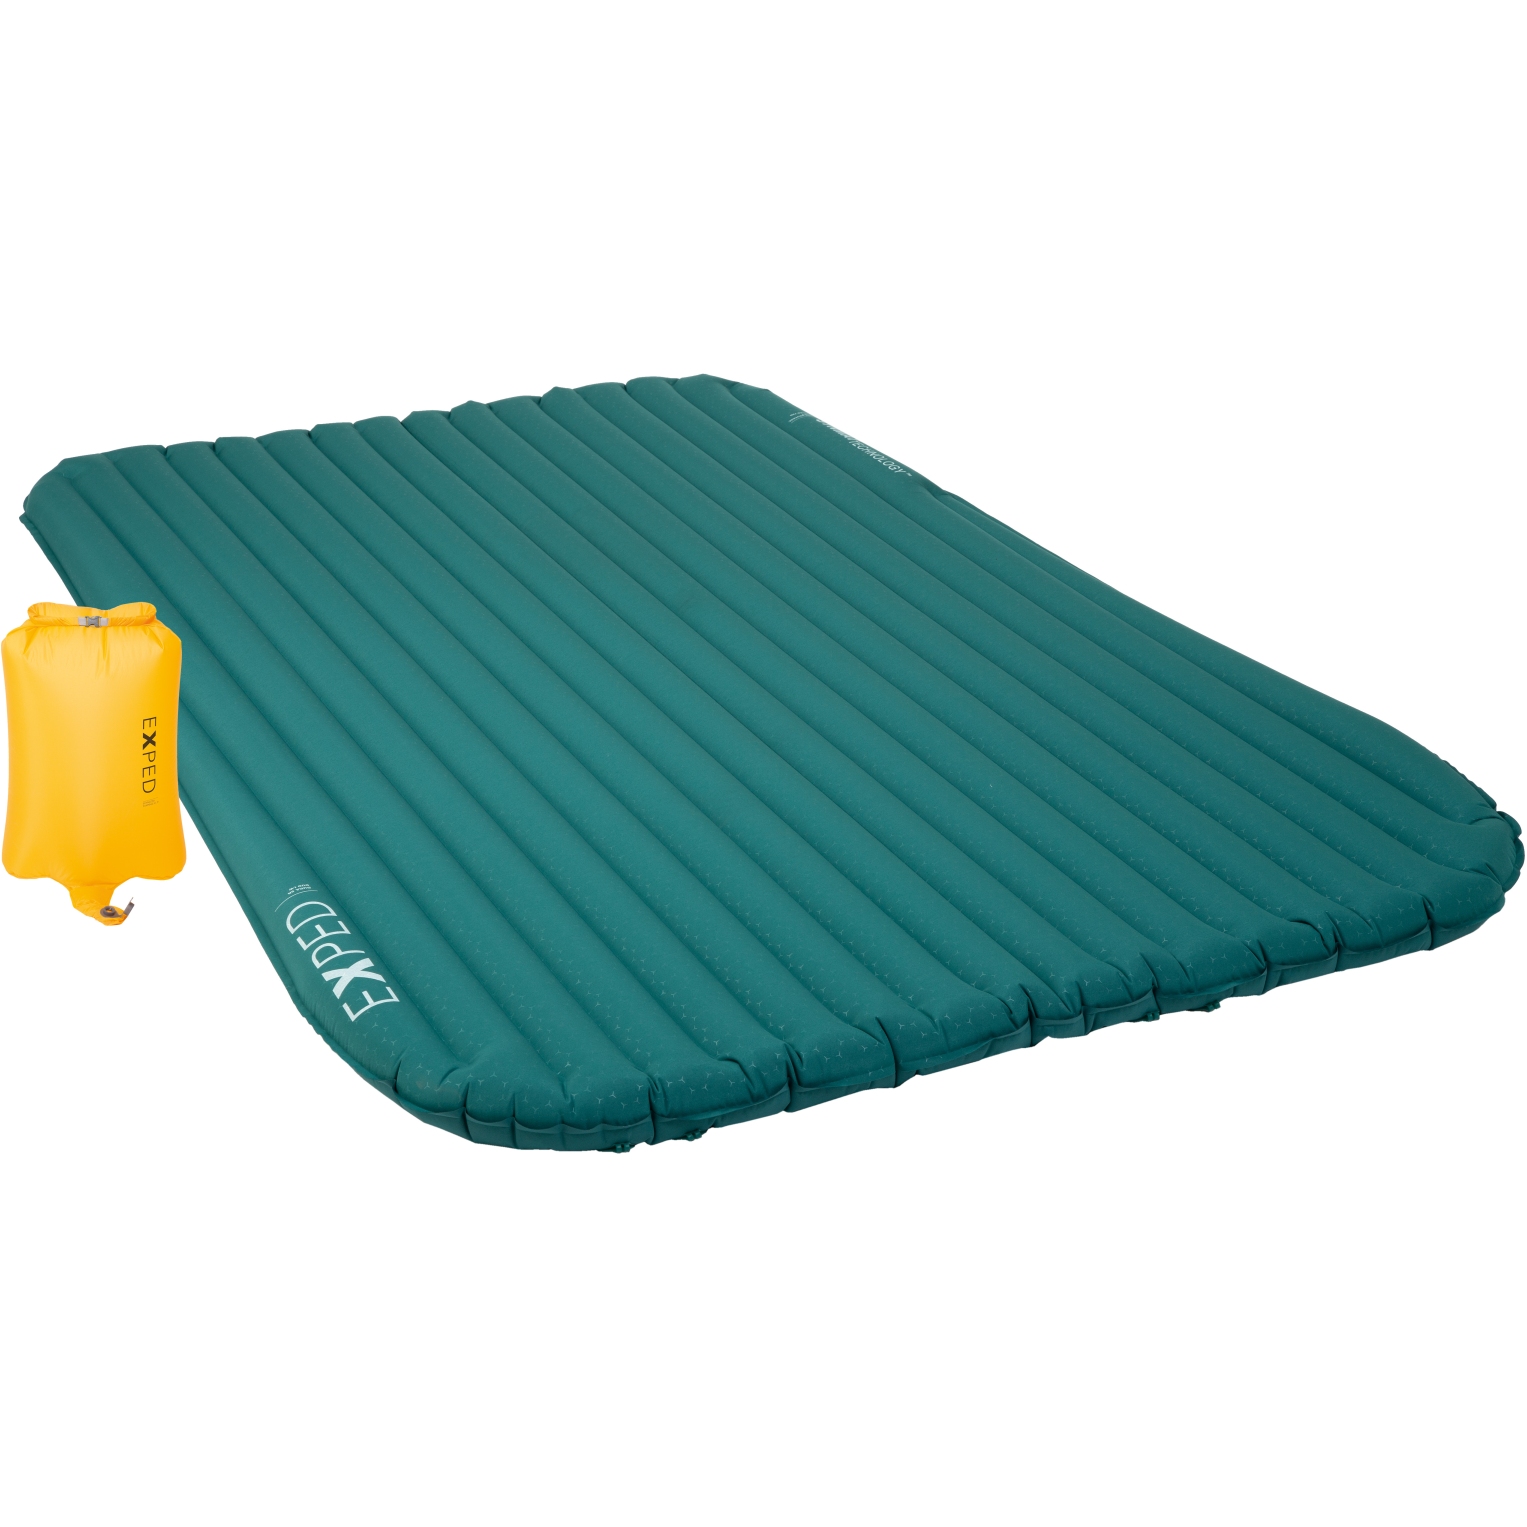 Image of Exped Dura 5R Duo Sleeping Mat - LW - cypress